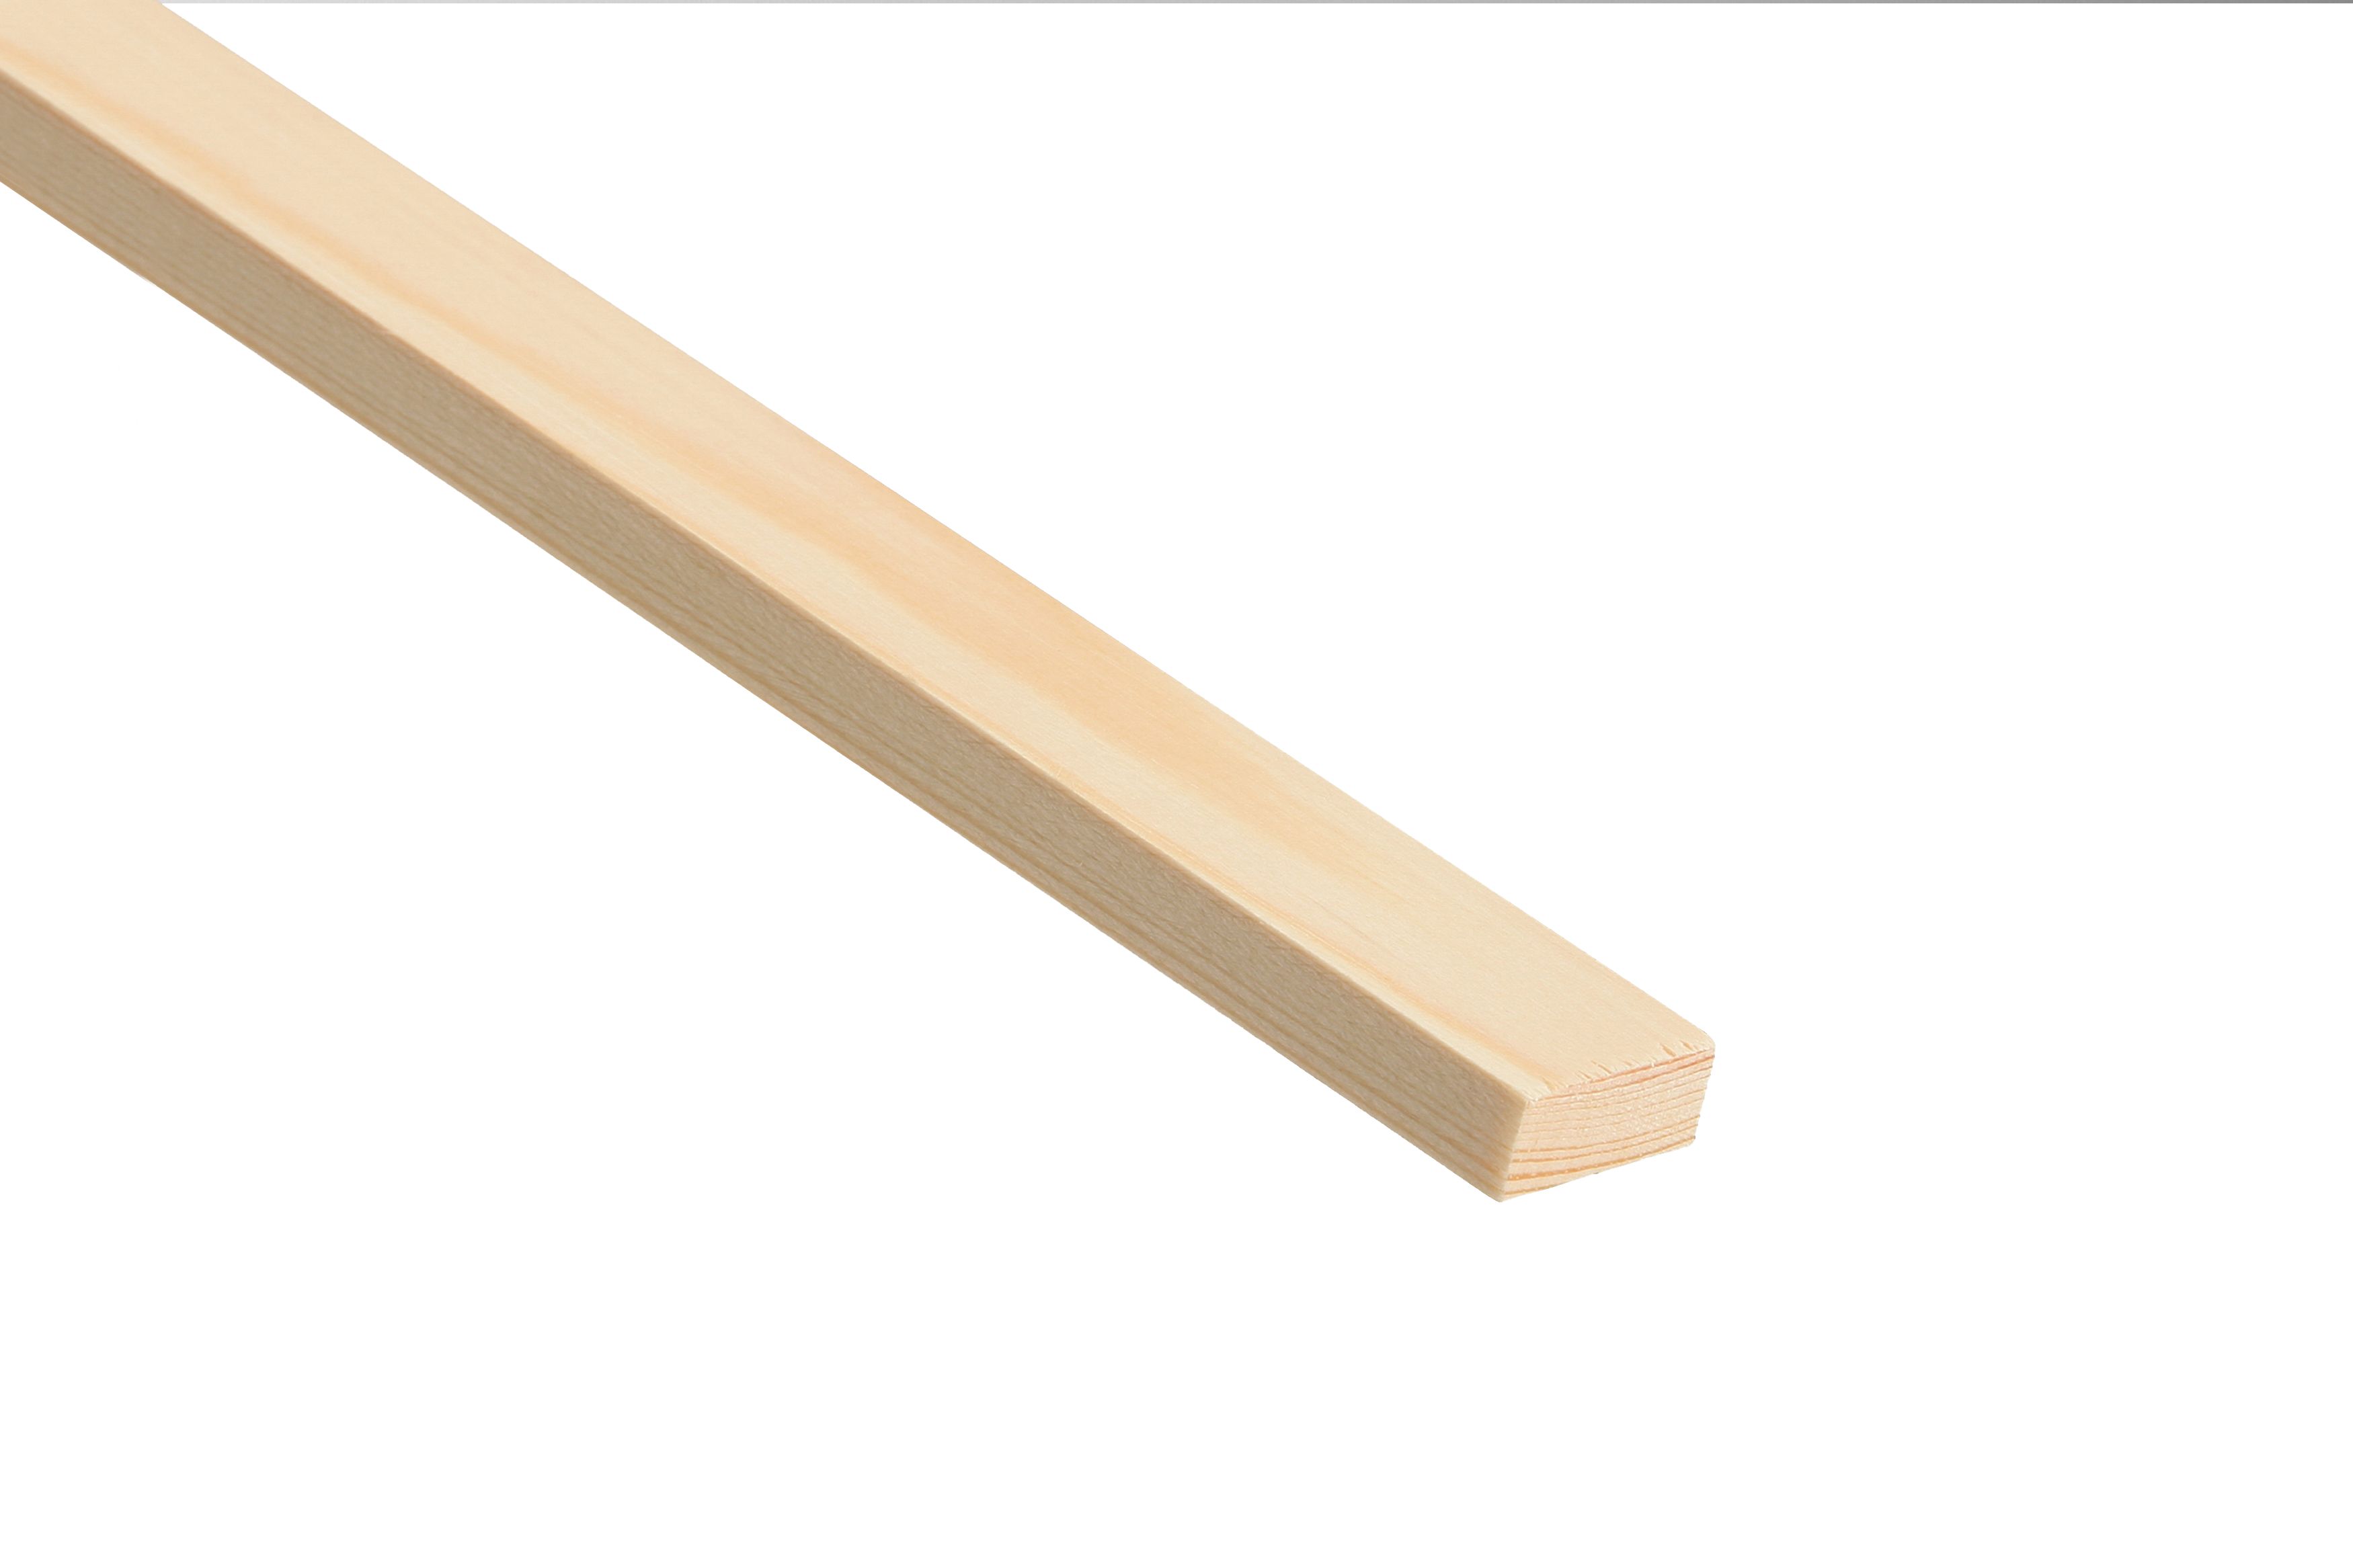 Image of Wickes Pine Stripwood Moulding (PSE) - 10 x 25 x 2400mm